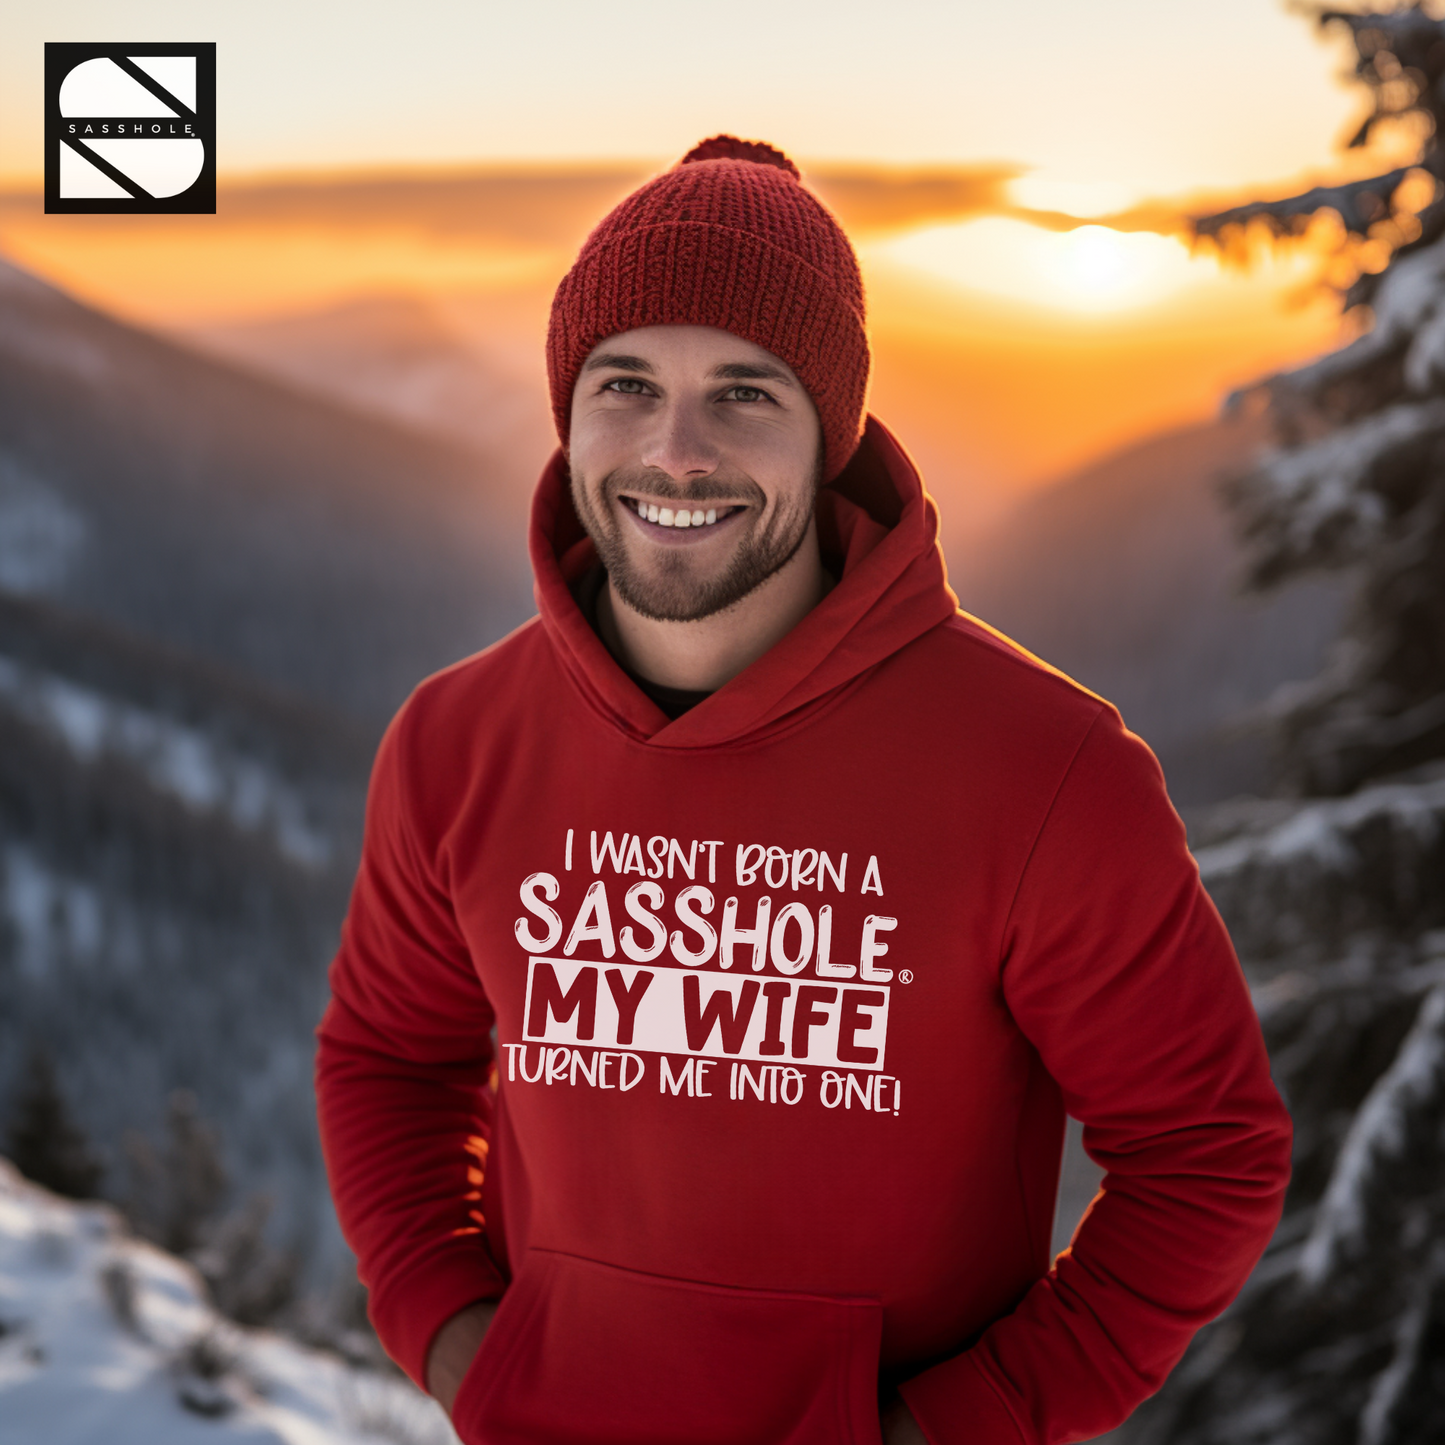 Sasshole® in Training: Blame the Wife for this Upgrade! - Funny Men's Pullover Hoodie